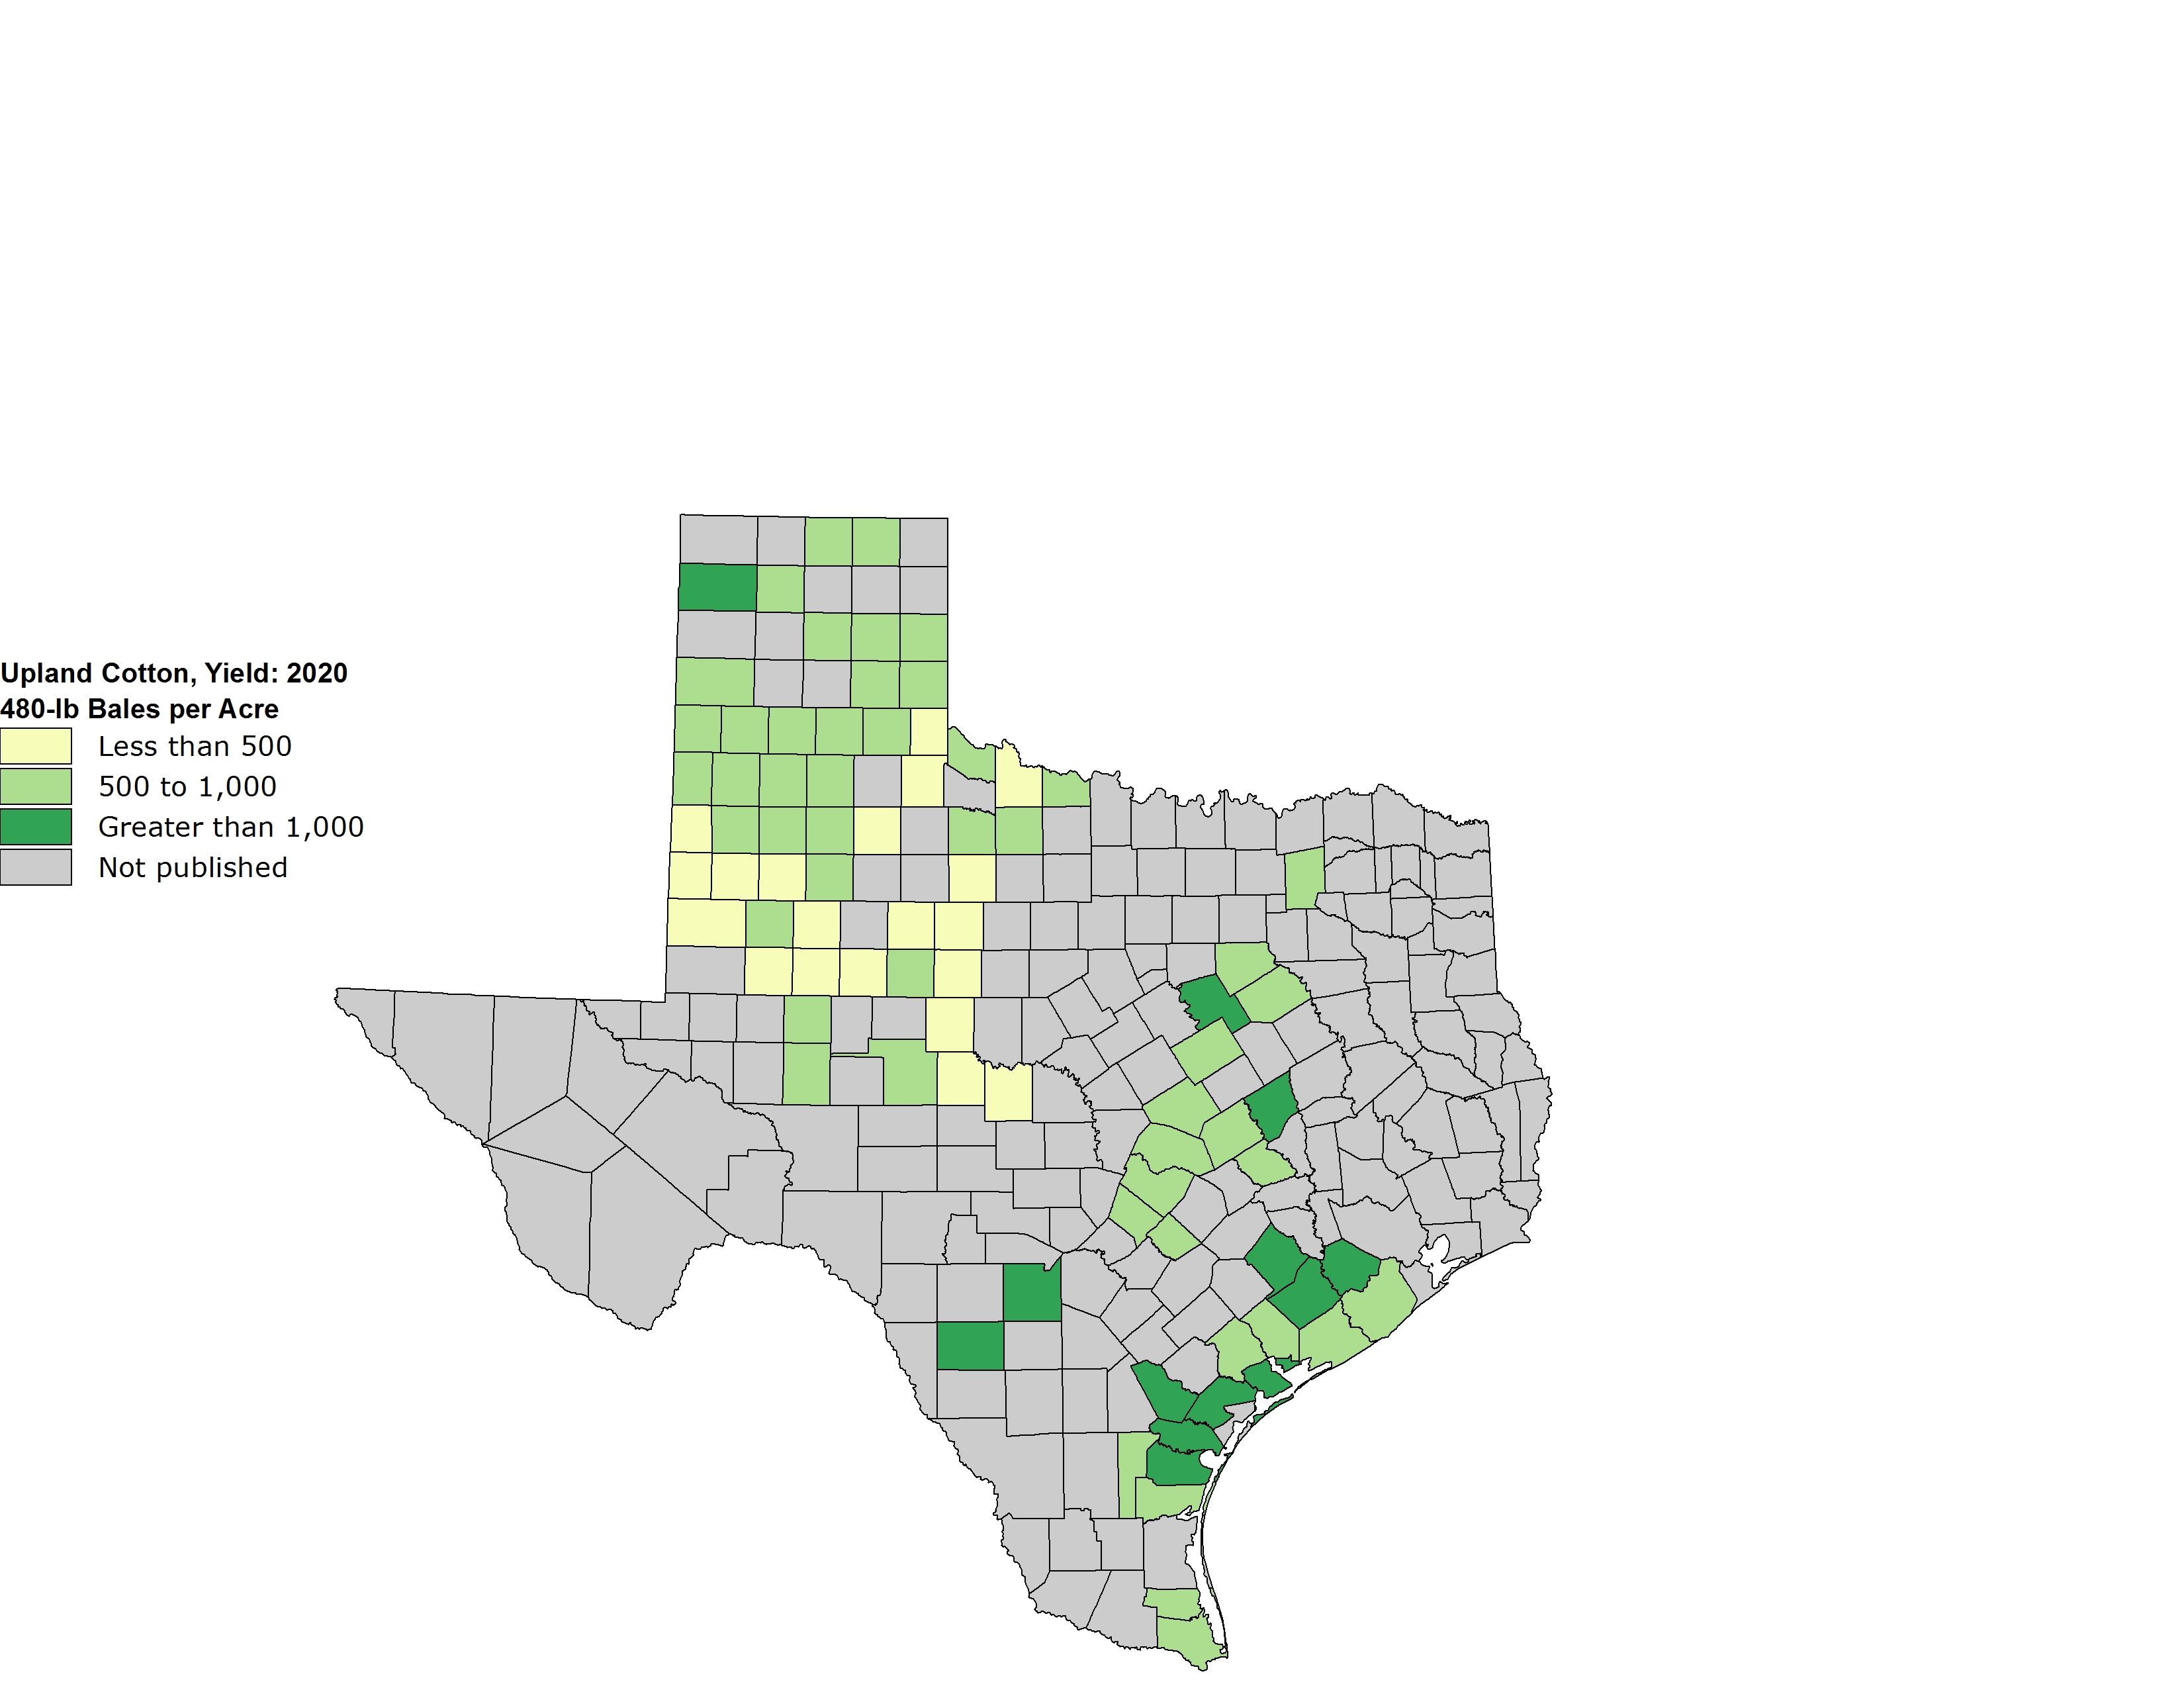 A shaded map of Texas showing the average yield of Upland cotton bales per acre.